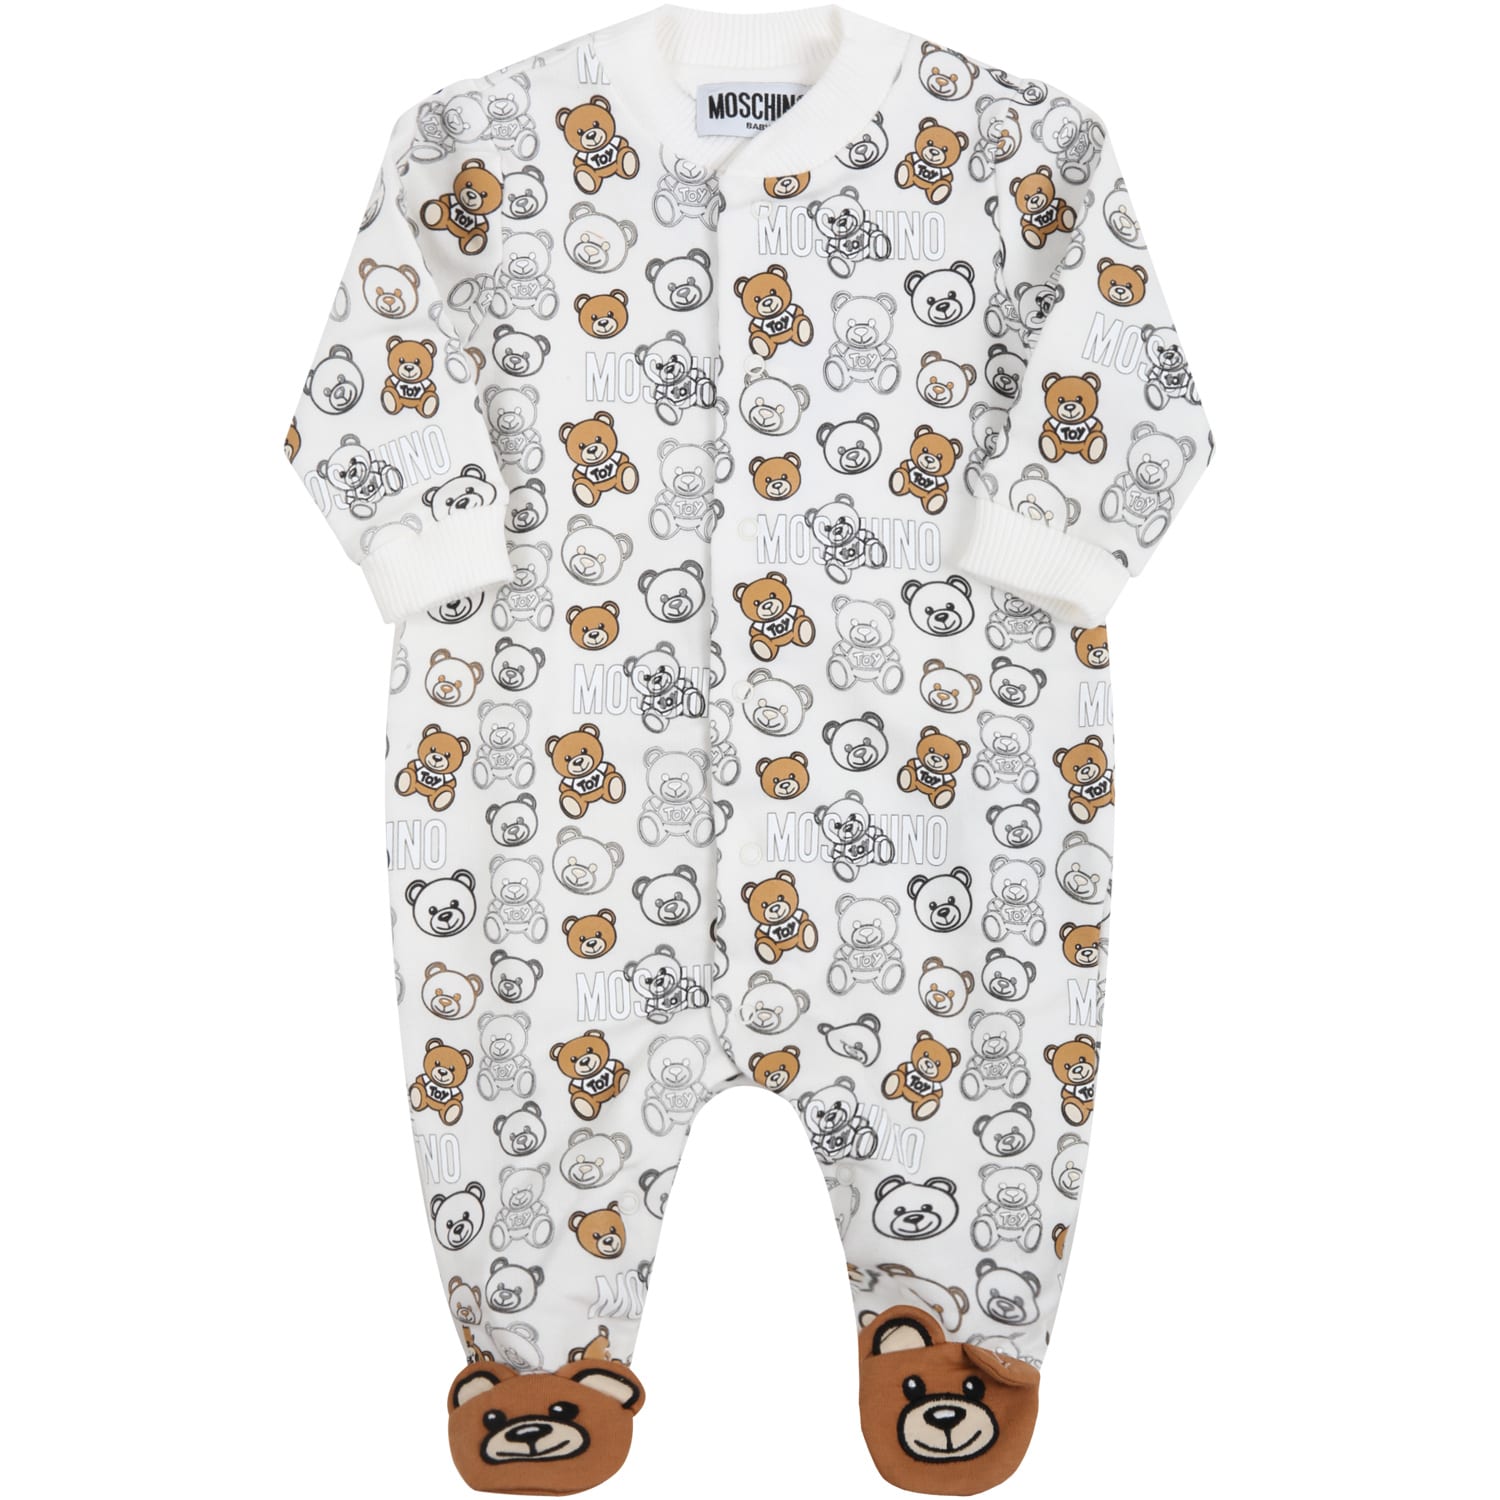 Moschino White Babygrow For Baby Kids With Teddy Bears